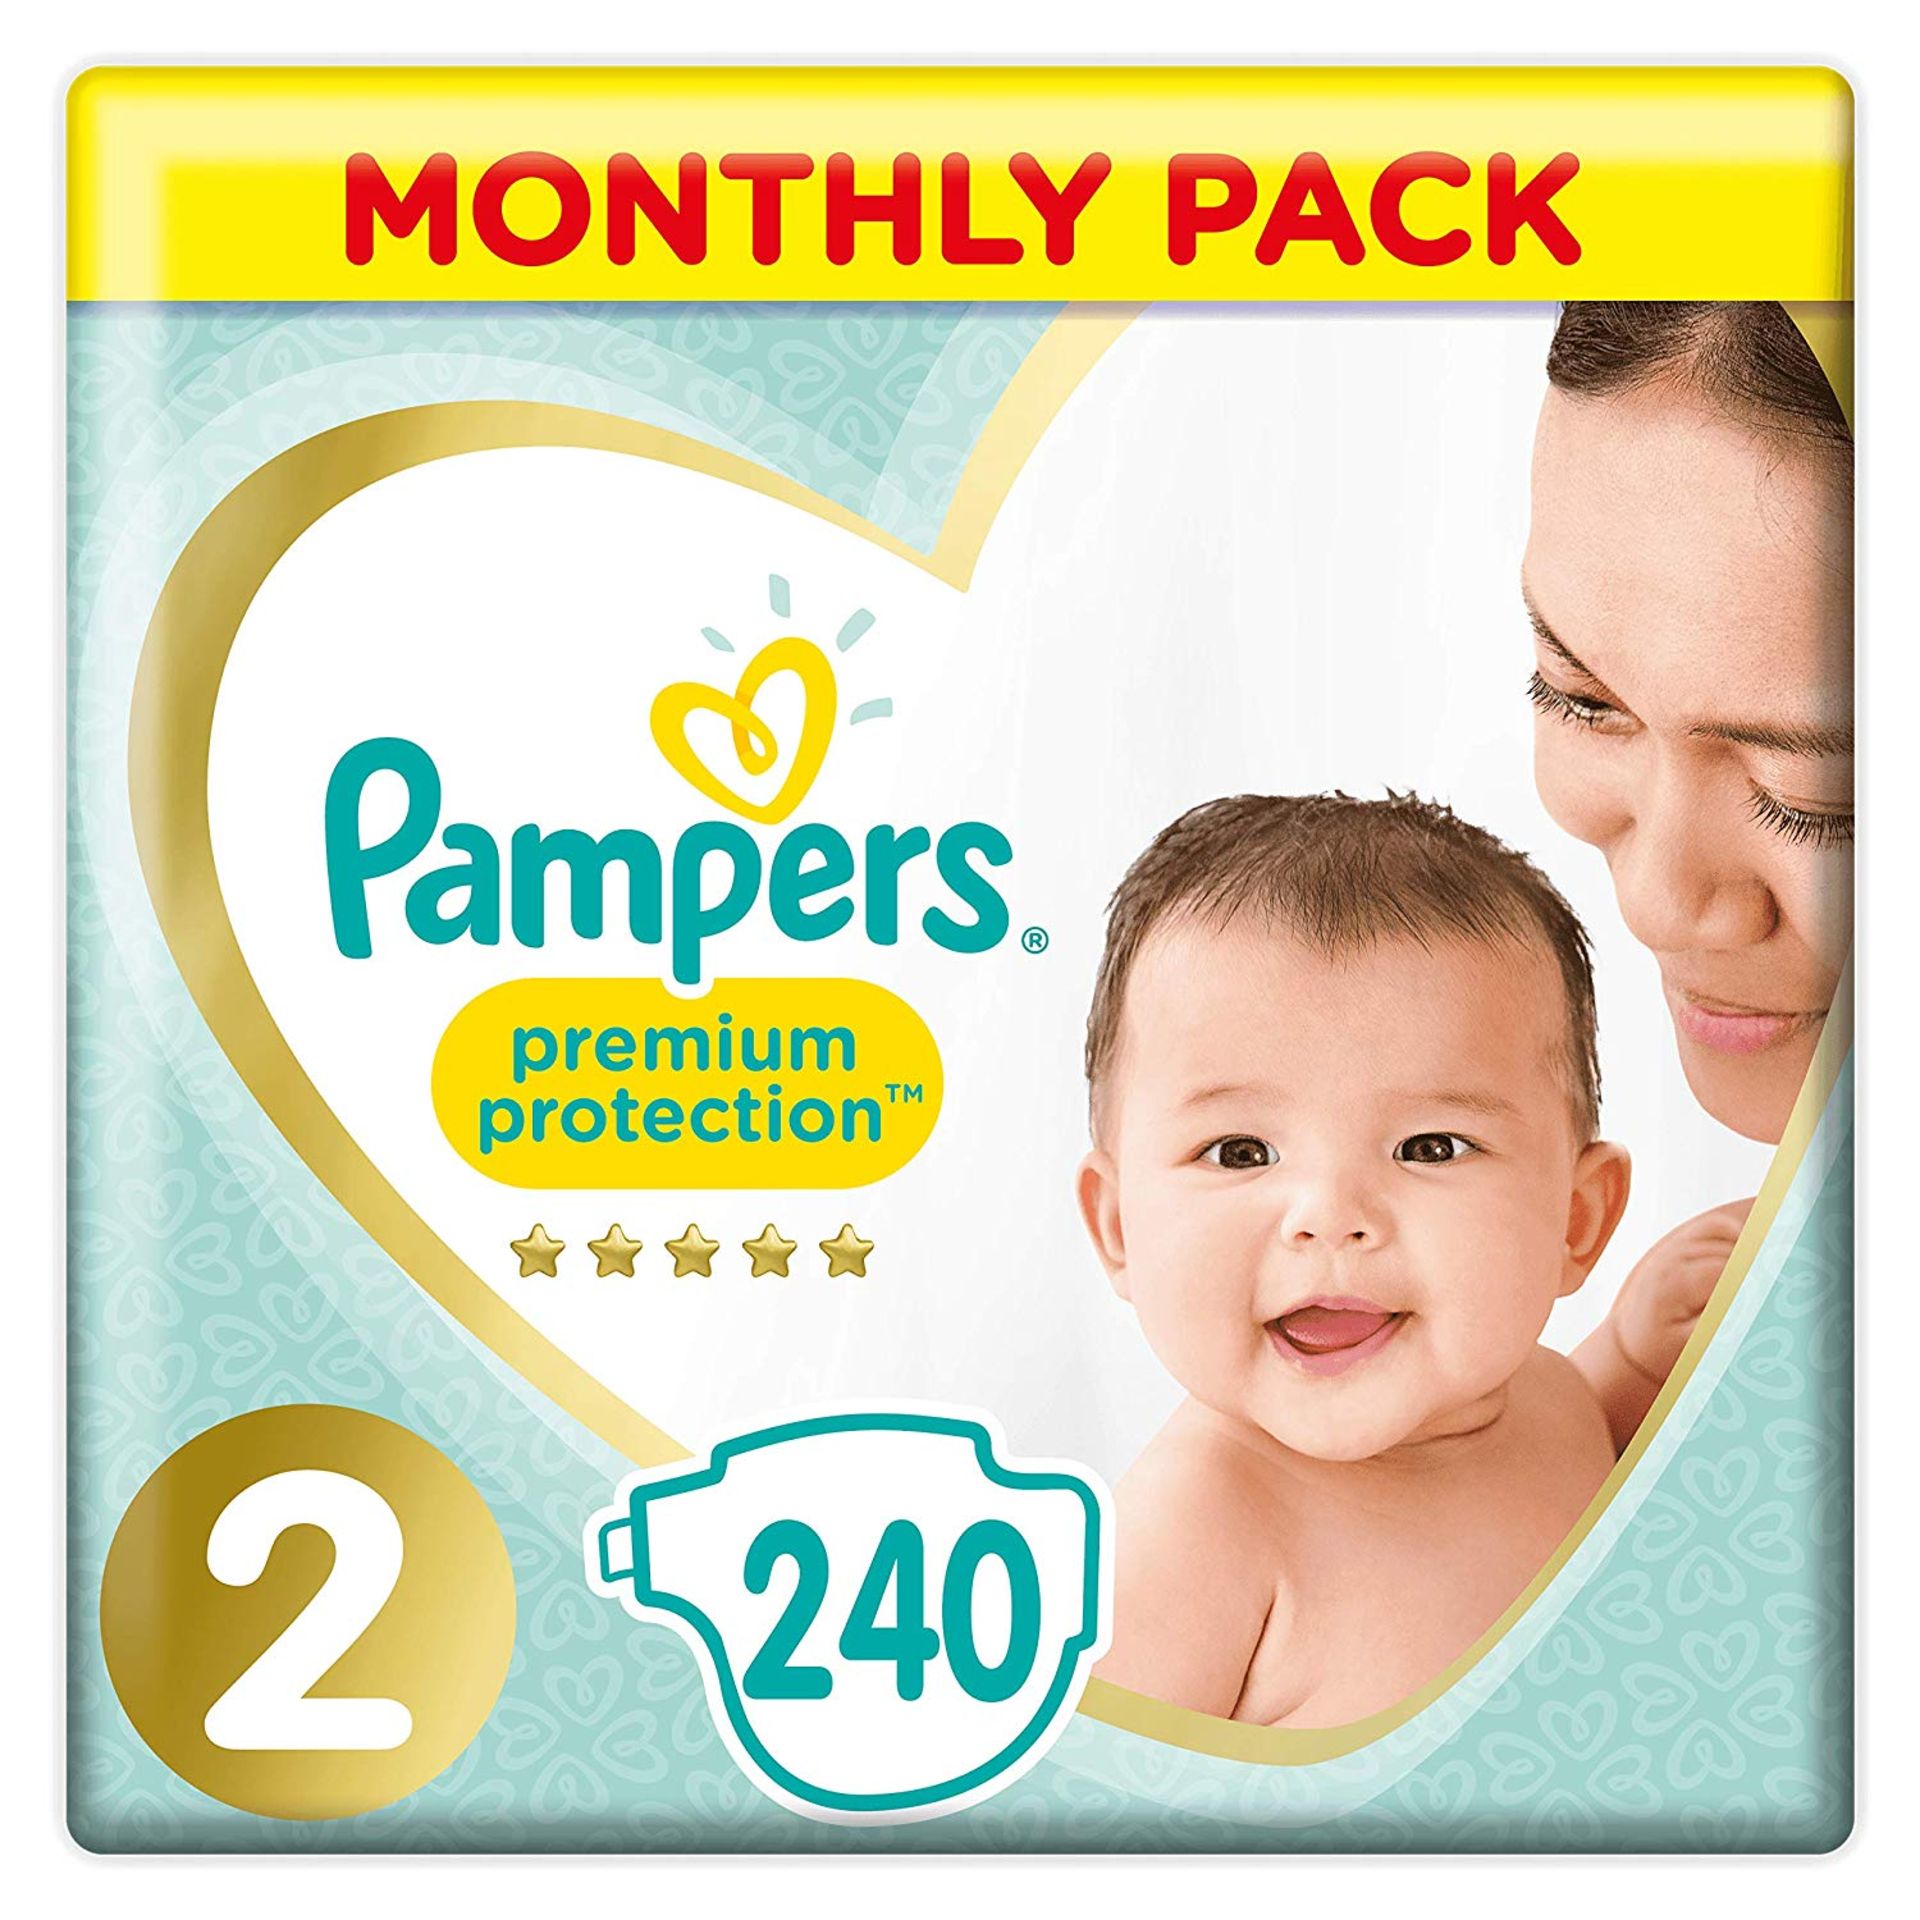 Brand new Pampers New Baby Size 2, 240 Nappies, (4-8 kg), Monthly Pack